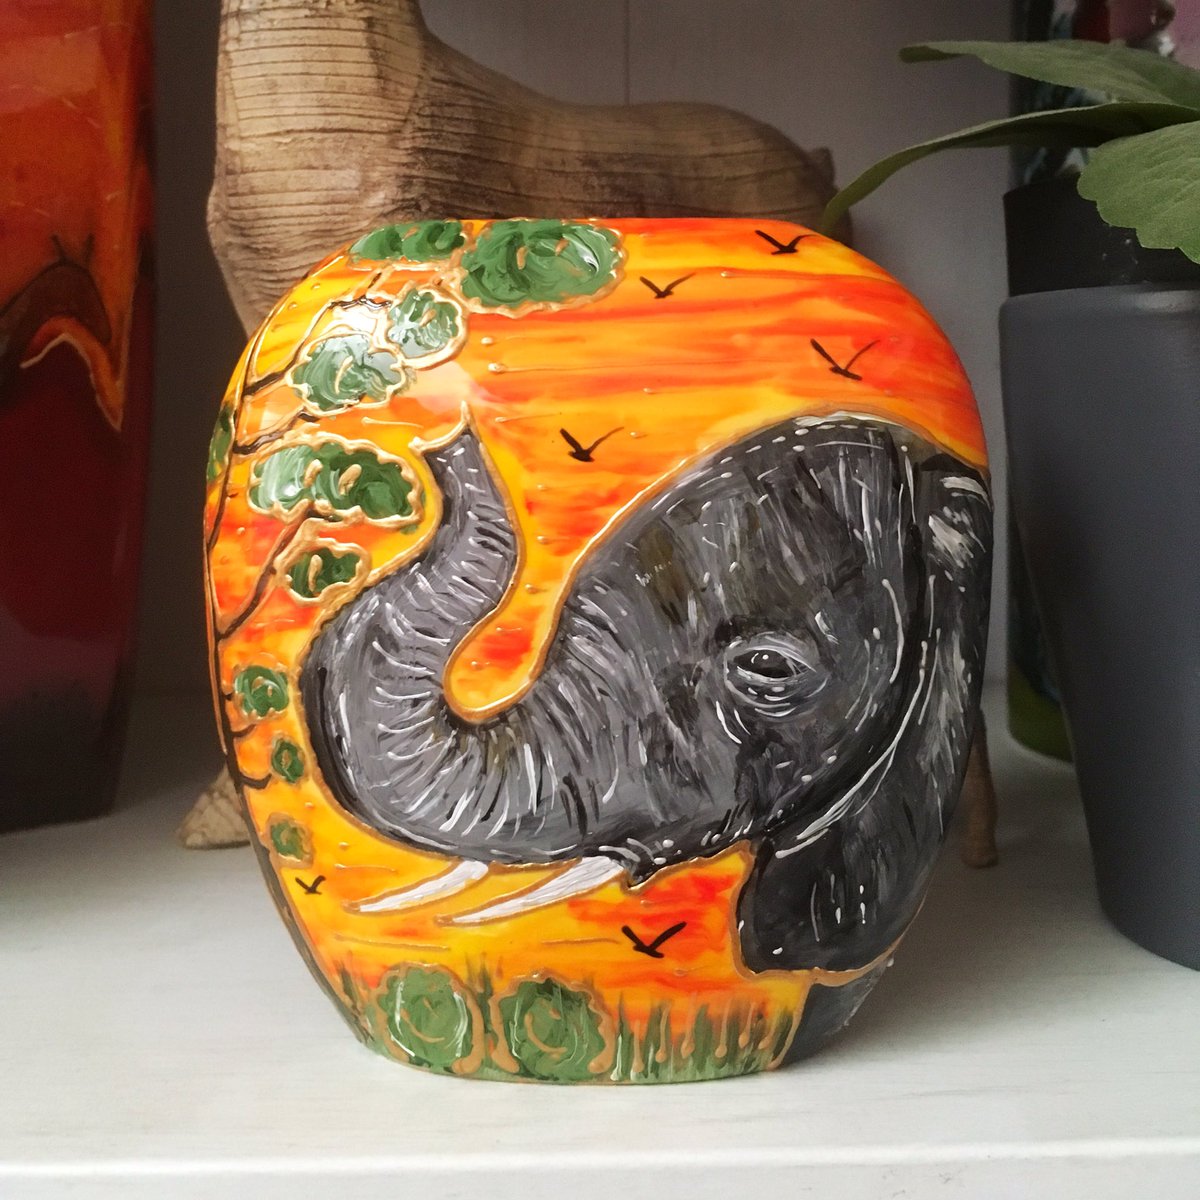 This lovely vase was snapped up straight away once listed on Etsy. This is part of my safari range with more pieces to follow. #UKGiftAM #UKGiftHour #SundayThoughts #Elephants #britishpottery